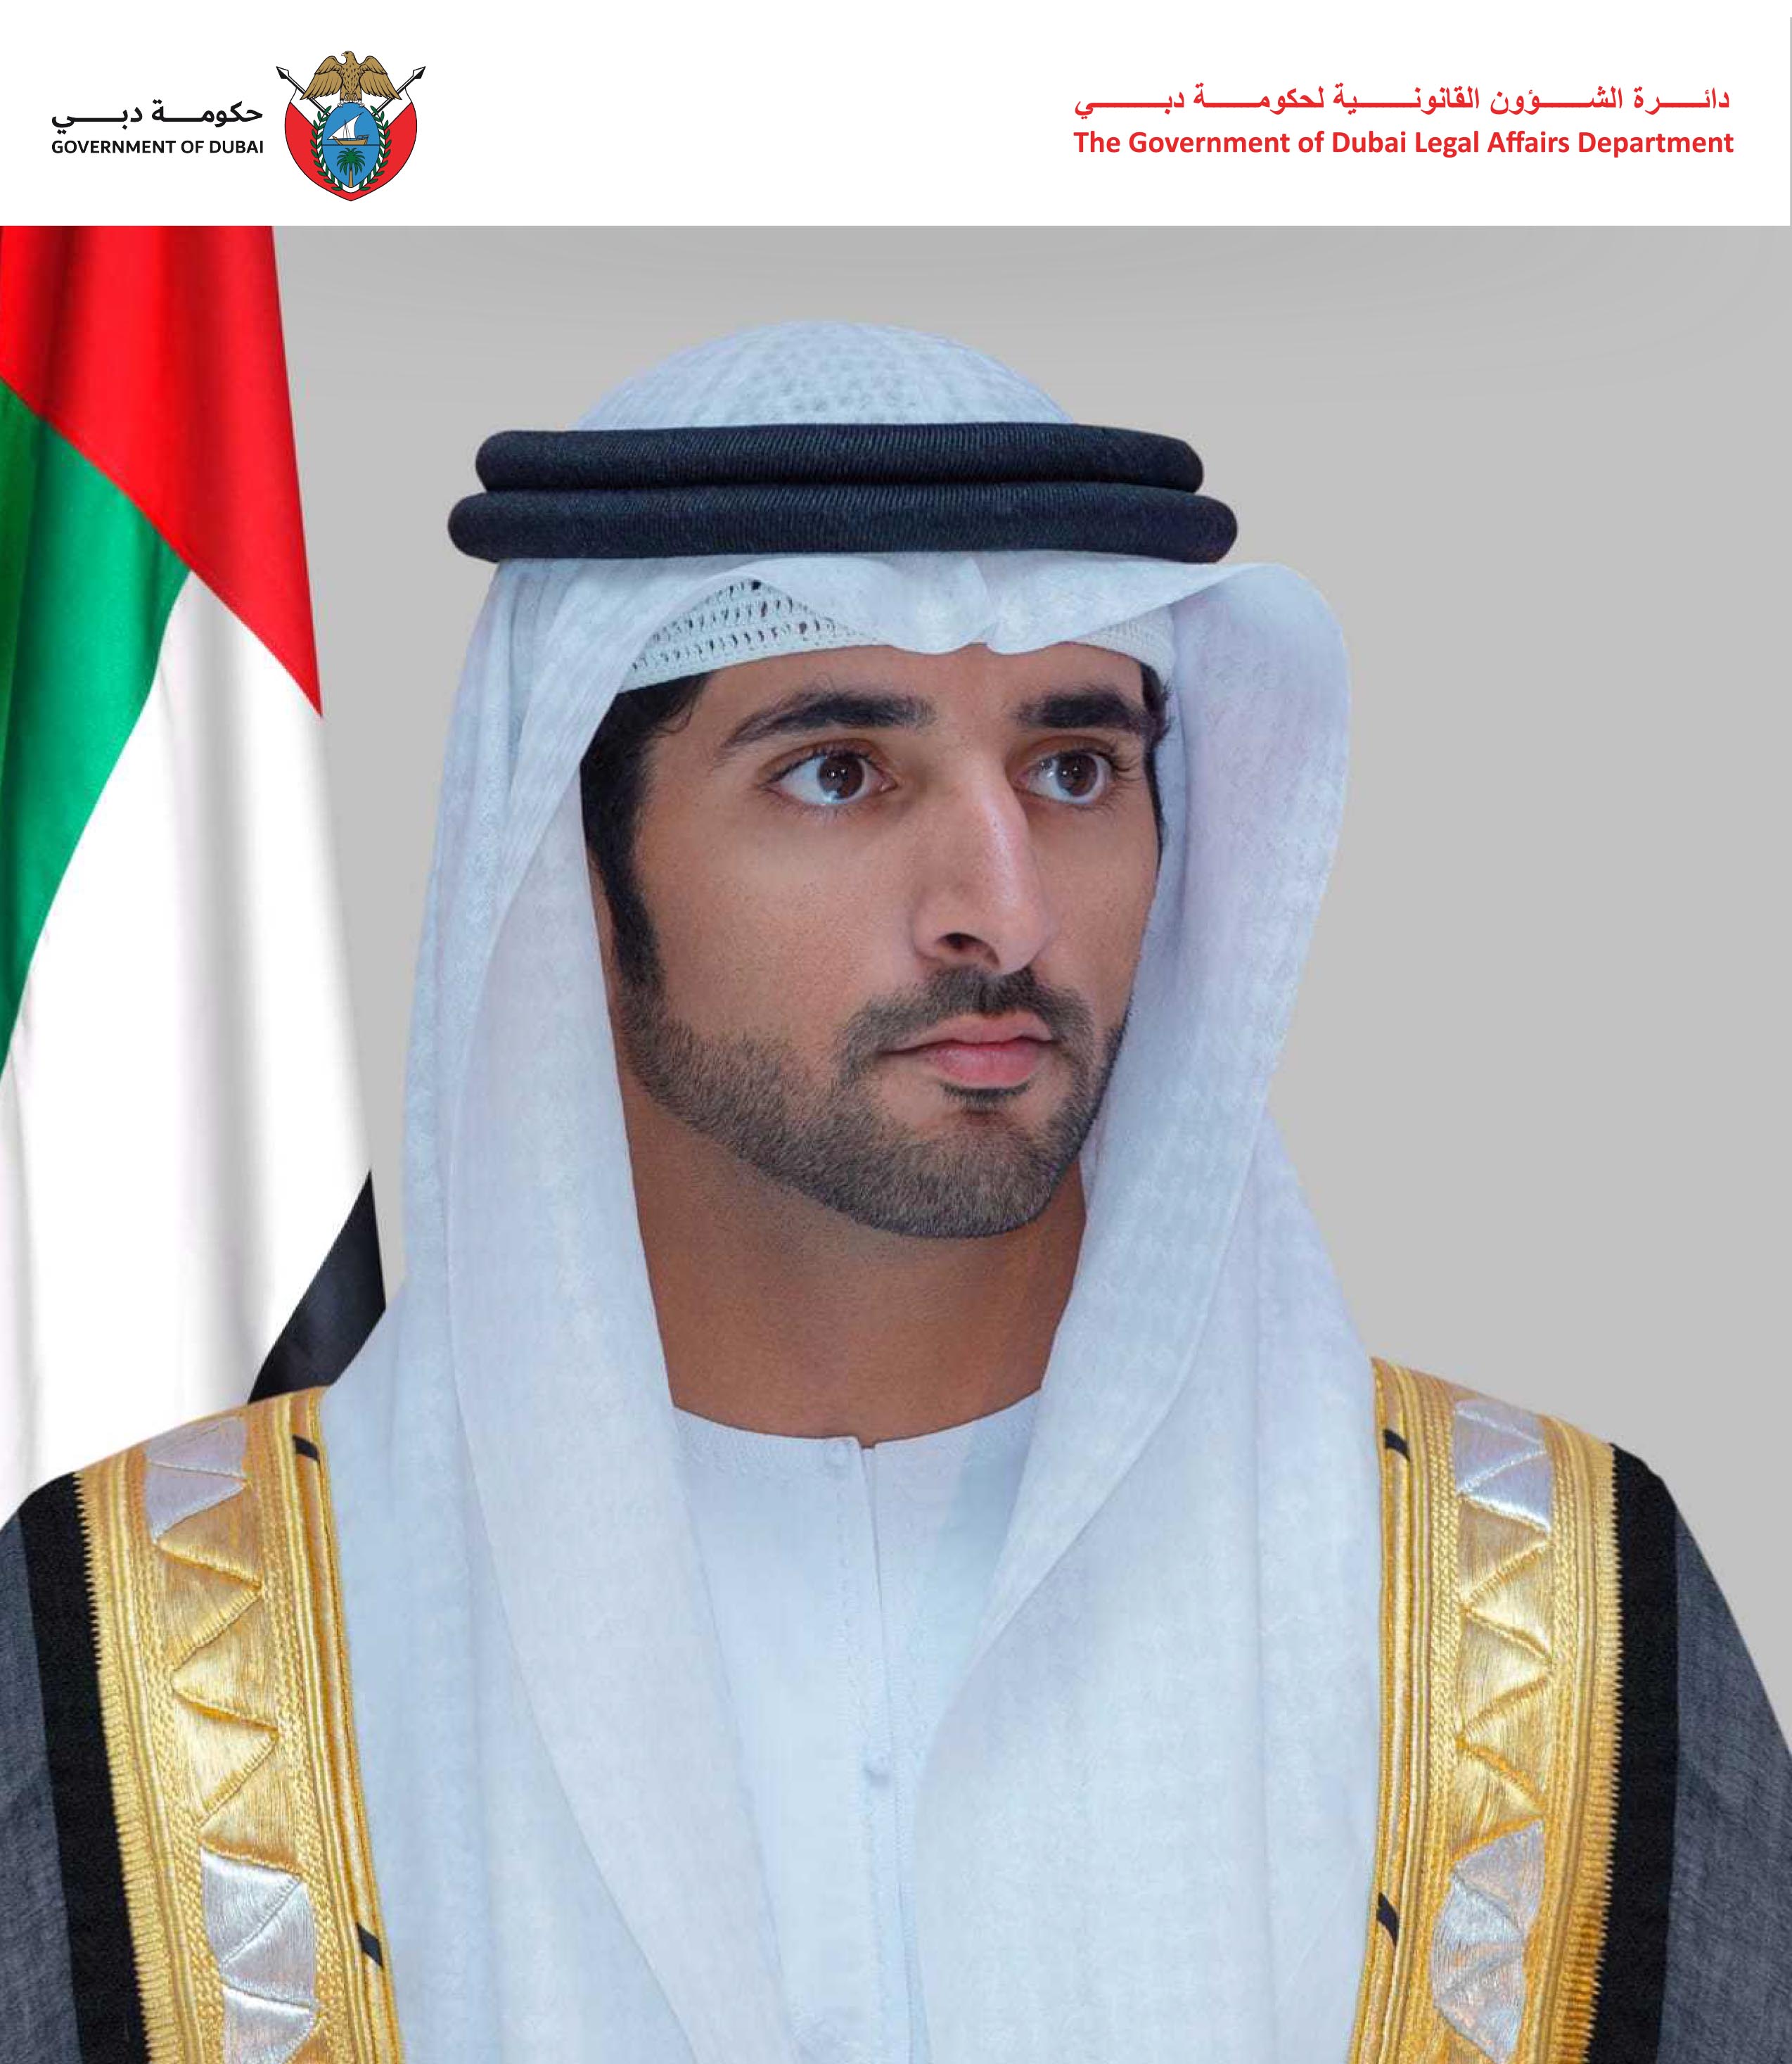 Statement by His Excellency Director General of the Government of Dubai Legal Affairs Department on the occasion of the Appointment of His Highness the Crown Prince of Dubai as Deputy Prime Minister and Minister of Defence